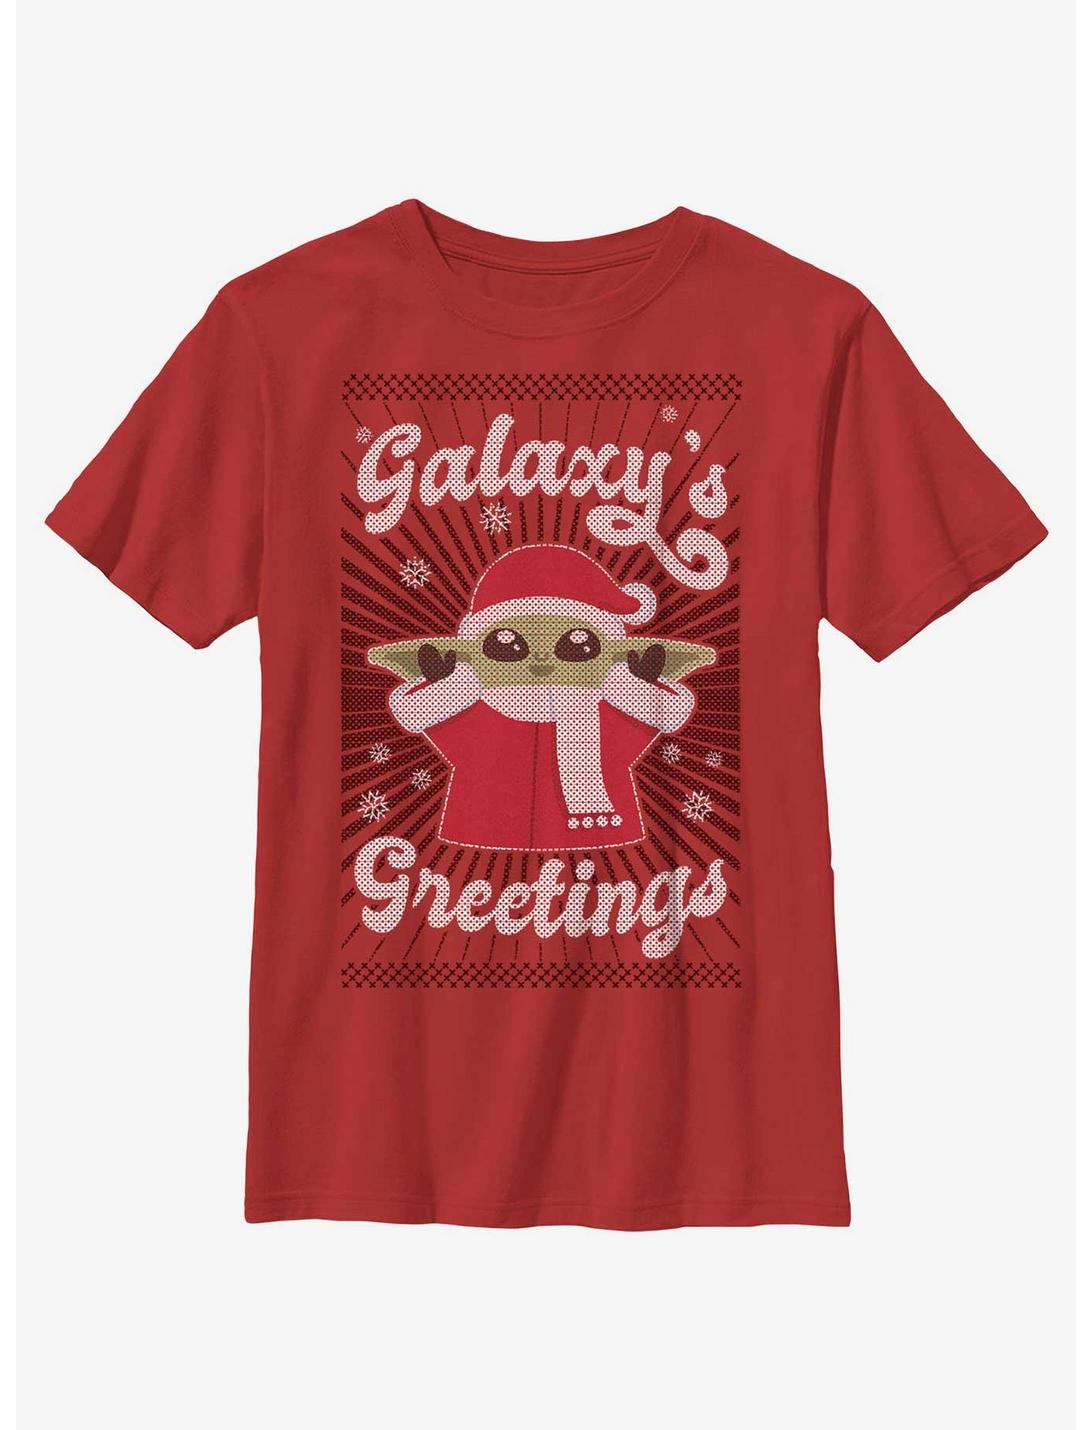 Star Wars The Mandalorian The Child Galaxy's Greetings Youth T-Shirt, RED, hi-res